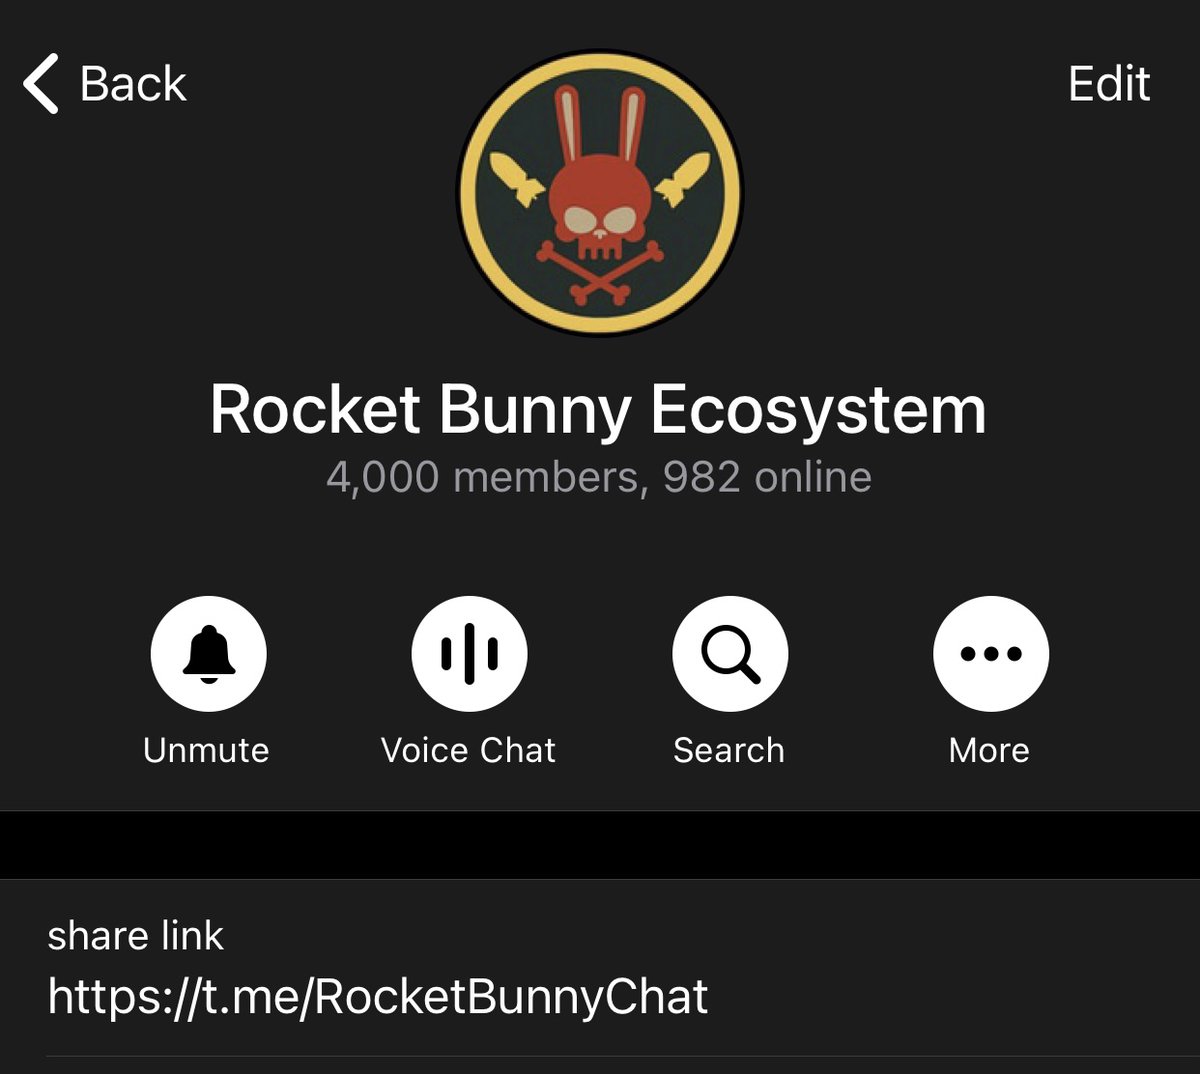 Rocket Bunny On Twitter 4000 Members And Growing Fast Pbom Listed On Coingecko This Morning New Staking Pools Out With More Coming Soon Rocket Swap And Rocket Labs Coming Very Soon Check